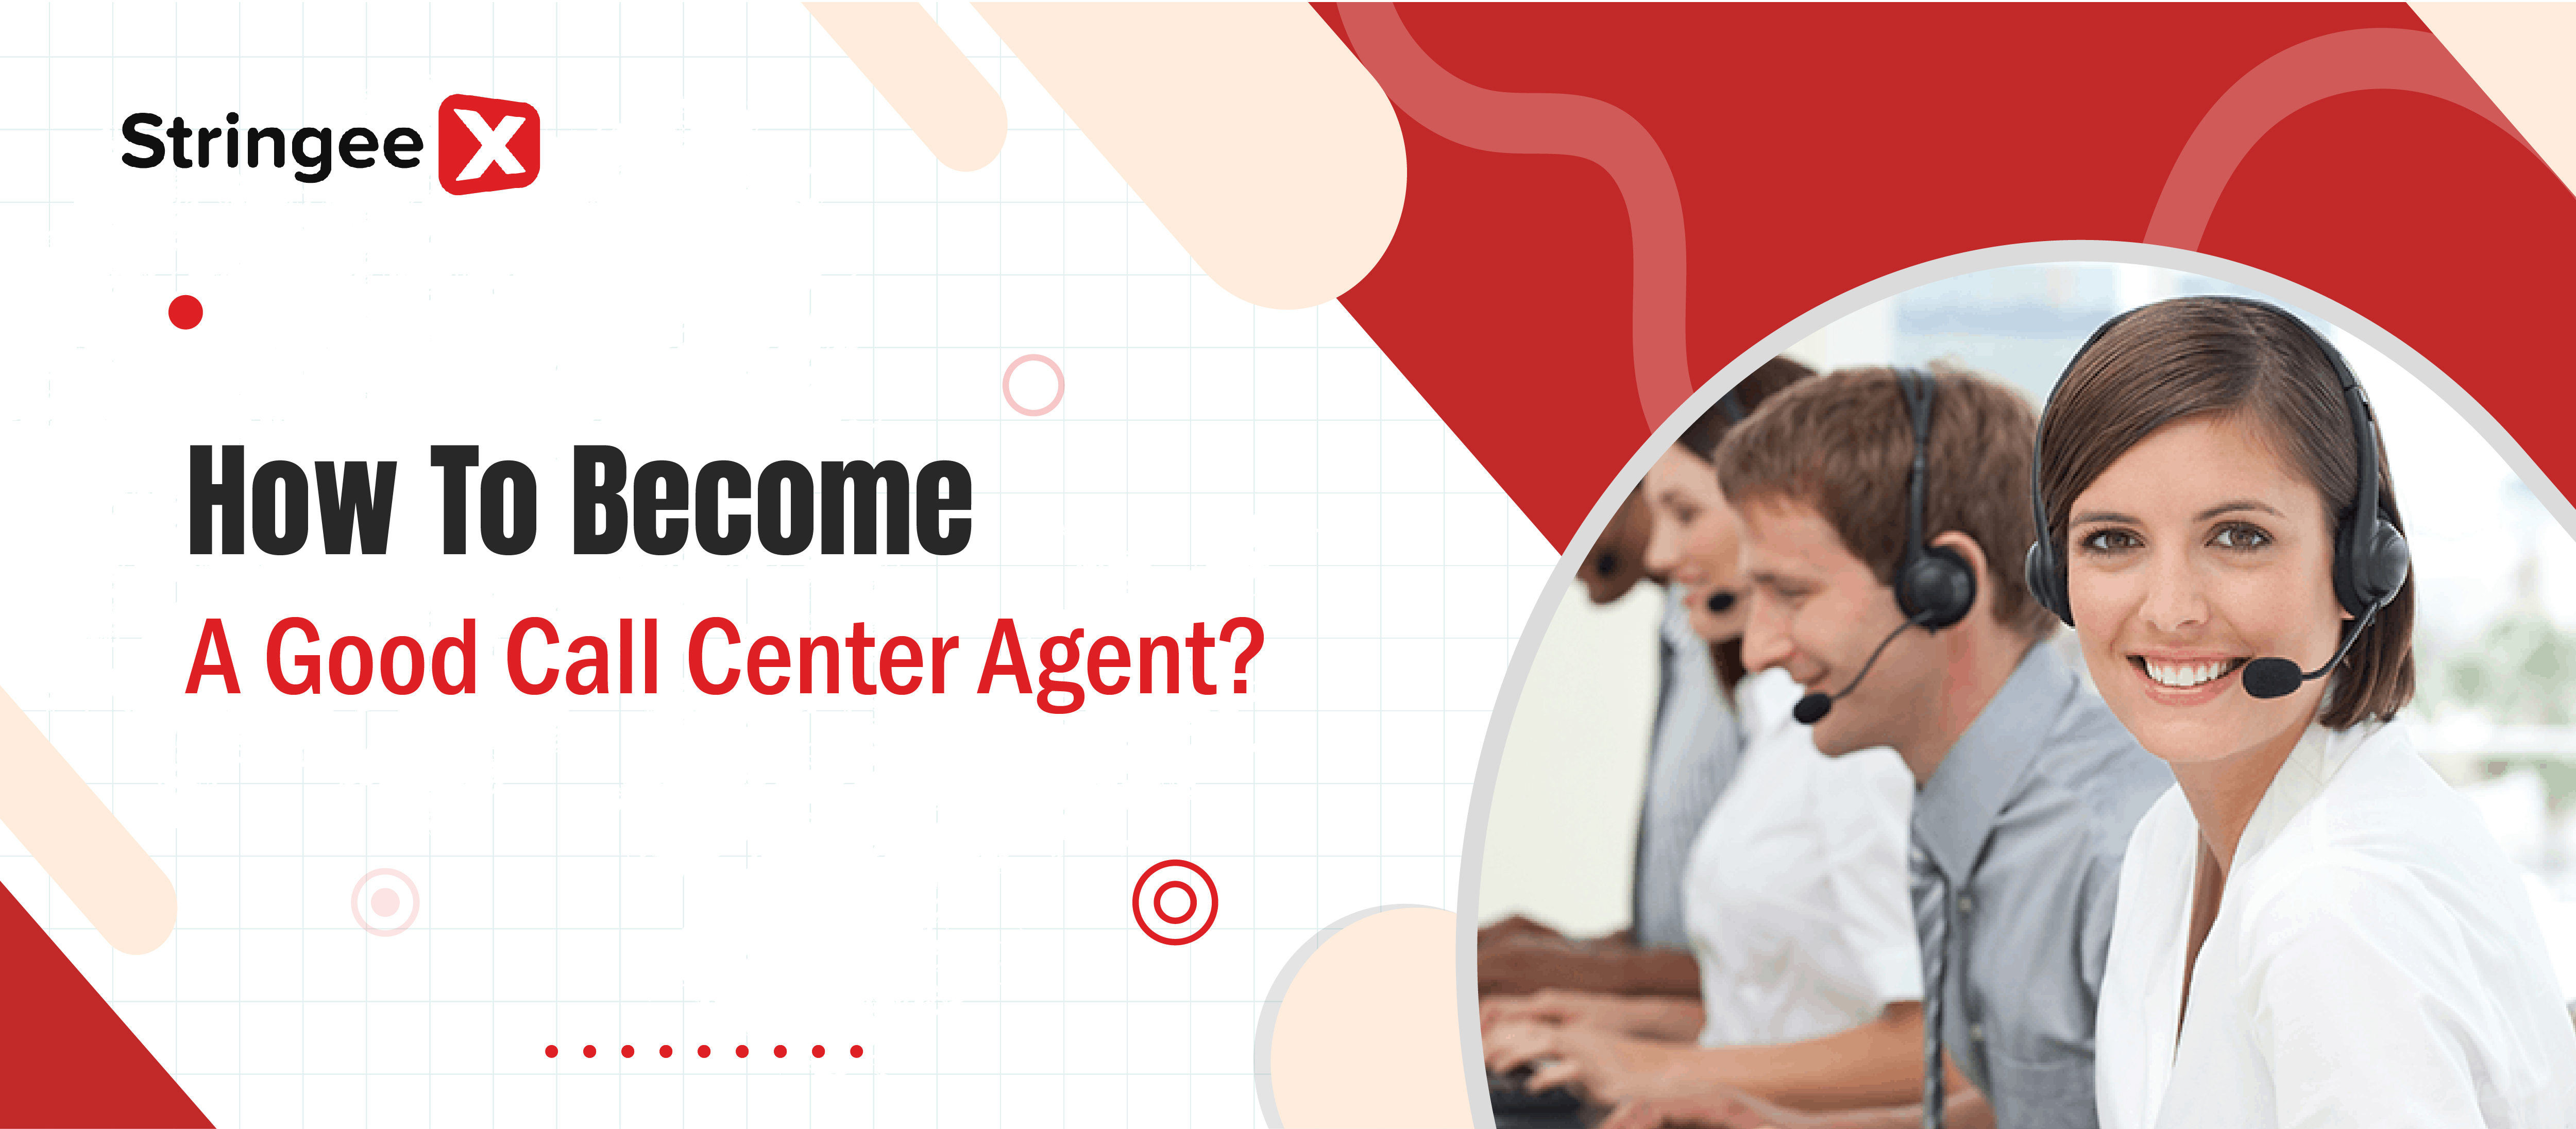 How To Become A Good Call Center Agent?